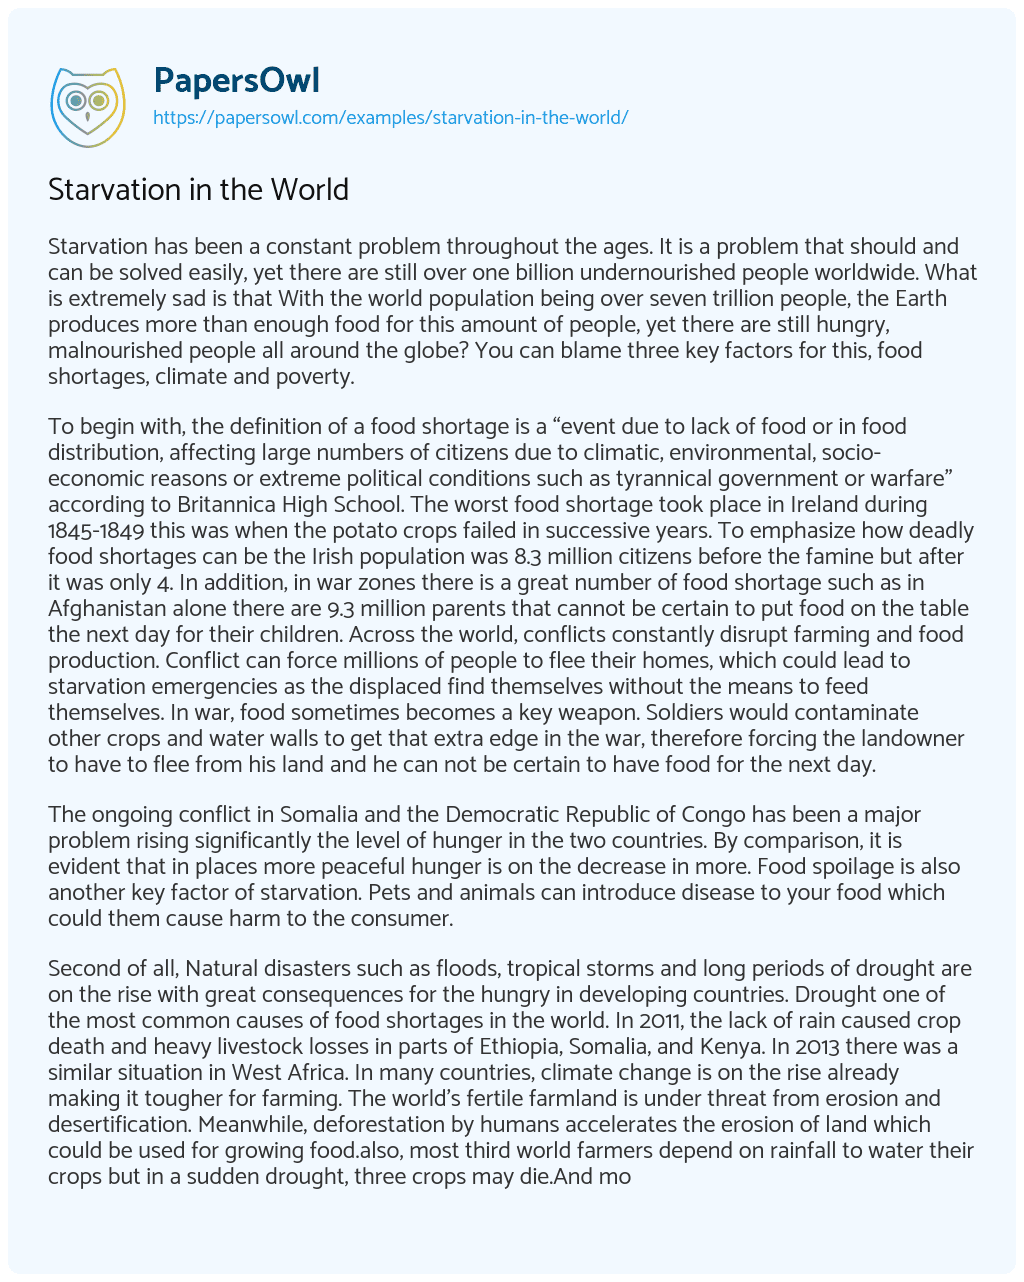 Starvation in the World essay